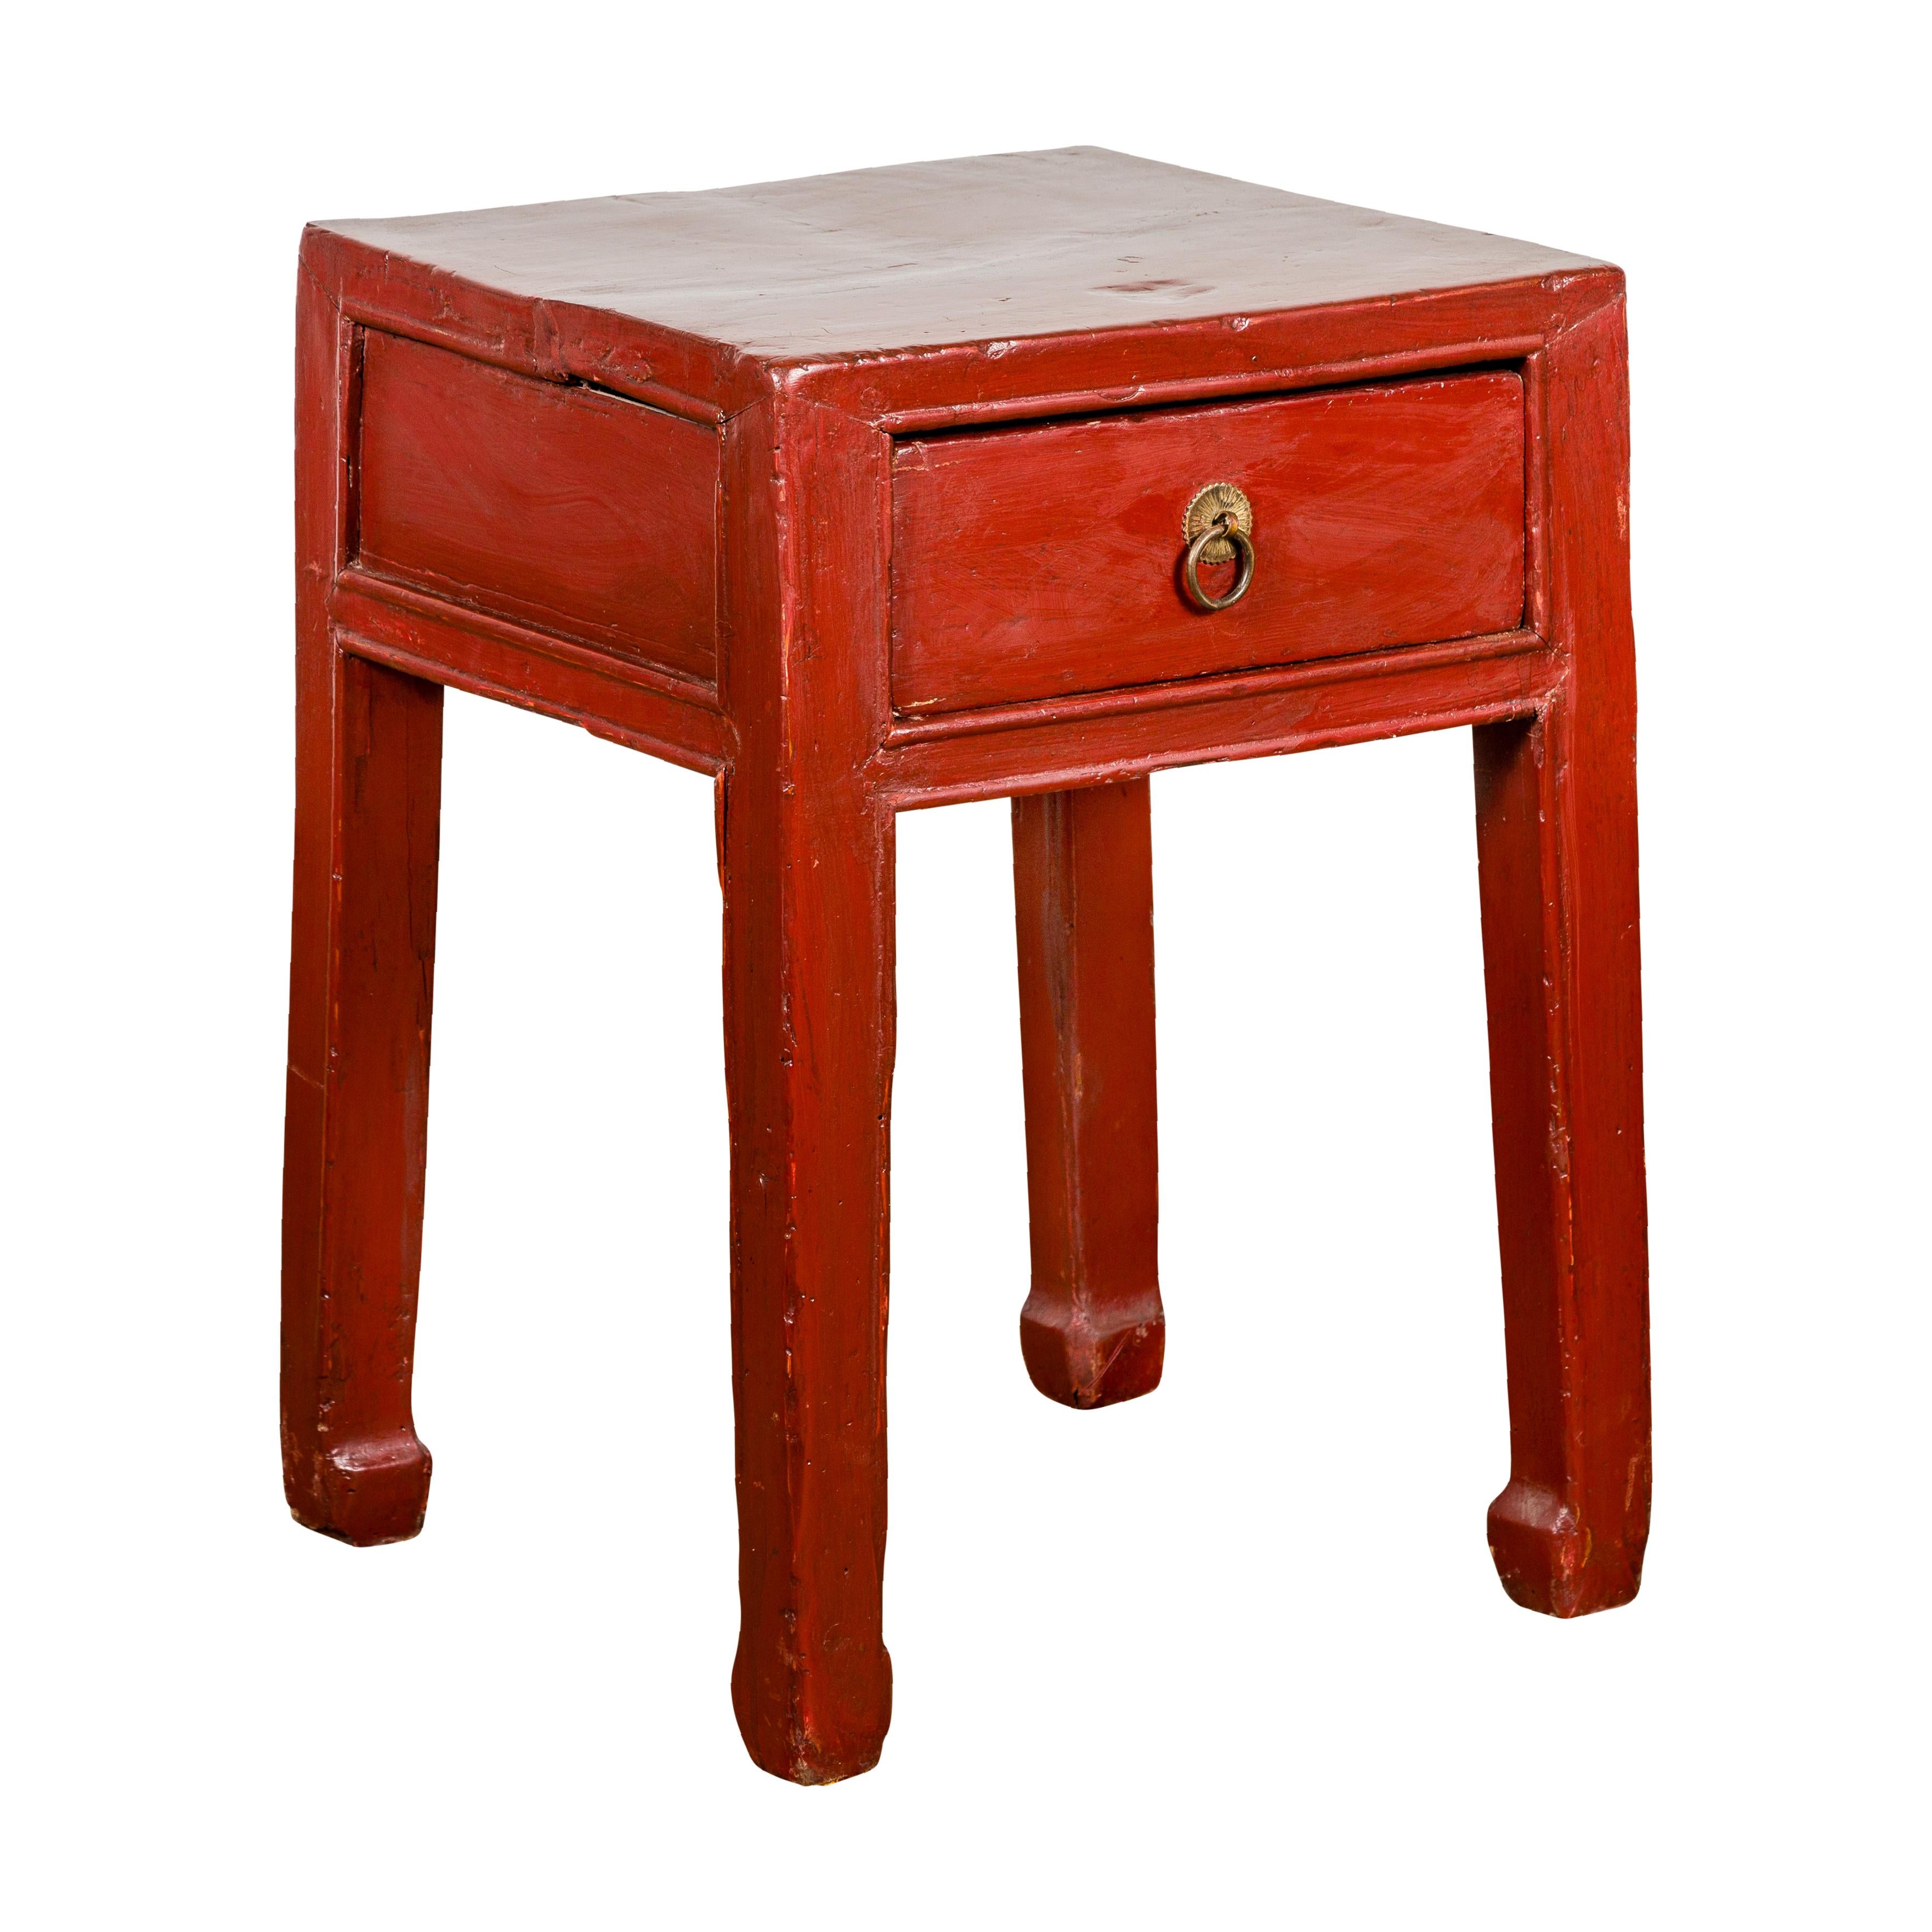 Late Qing Dynasty Red Lacquer Side Table with Single Drawer and Horse Hoof Feet For Sale 6